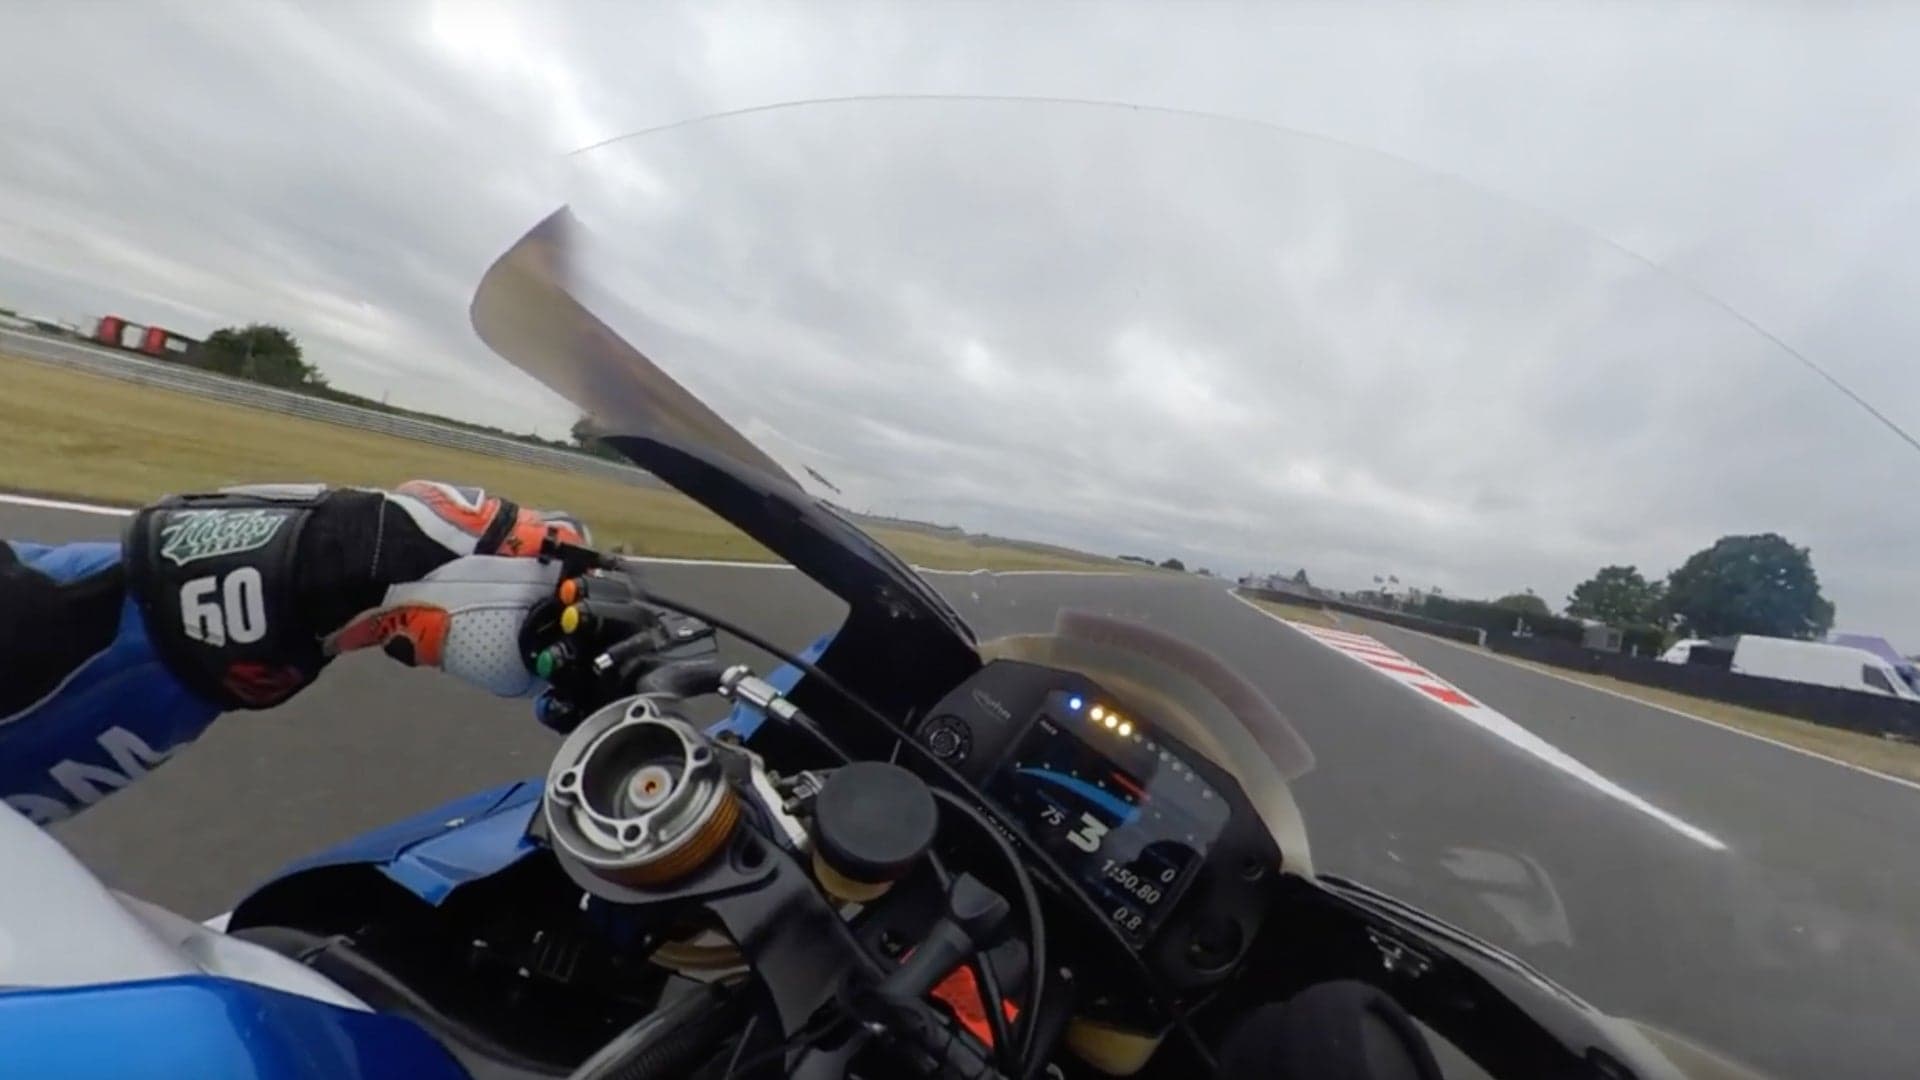 This 360-Degree Video Shows Just How Insane Racing a Motorcycle Really Is